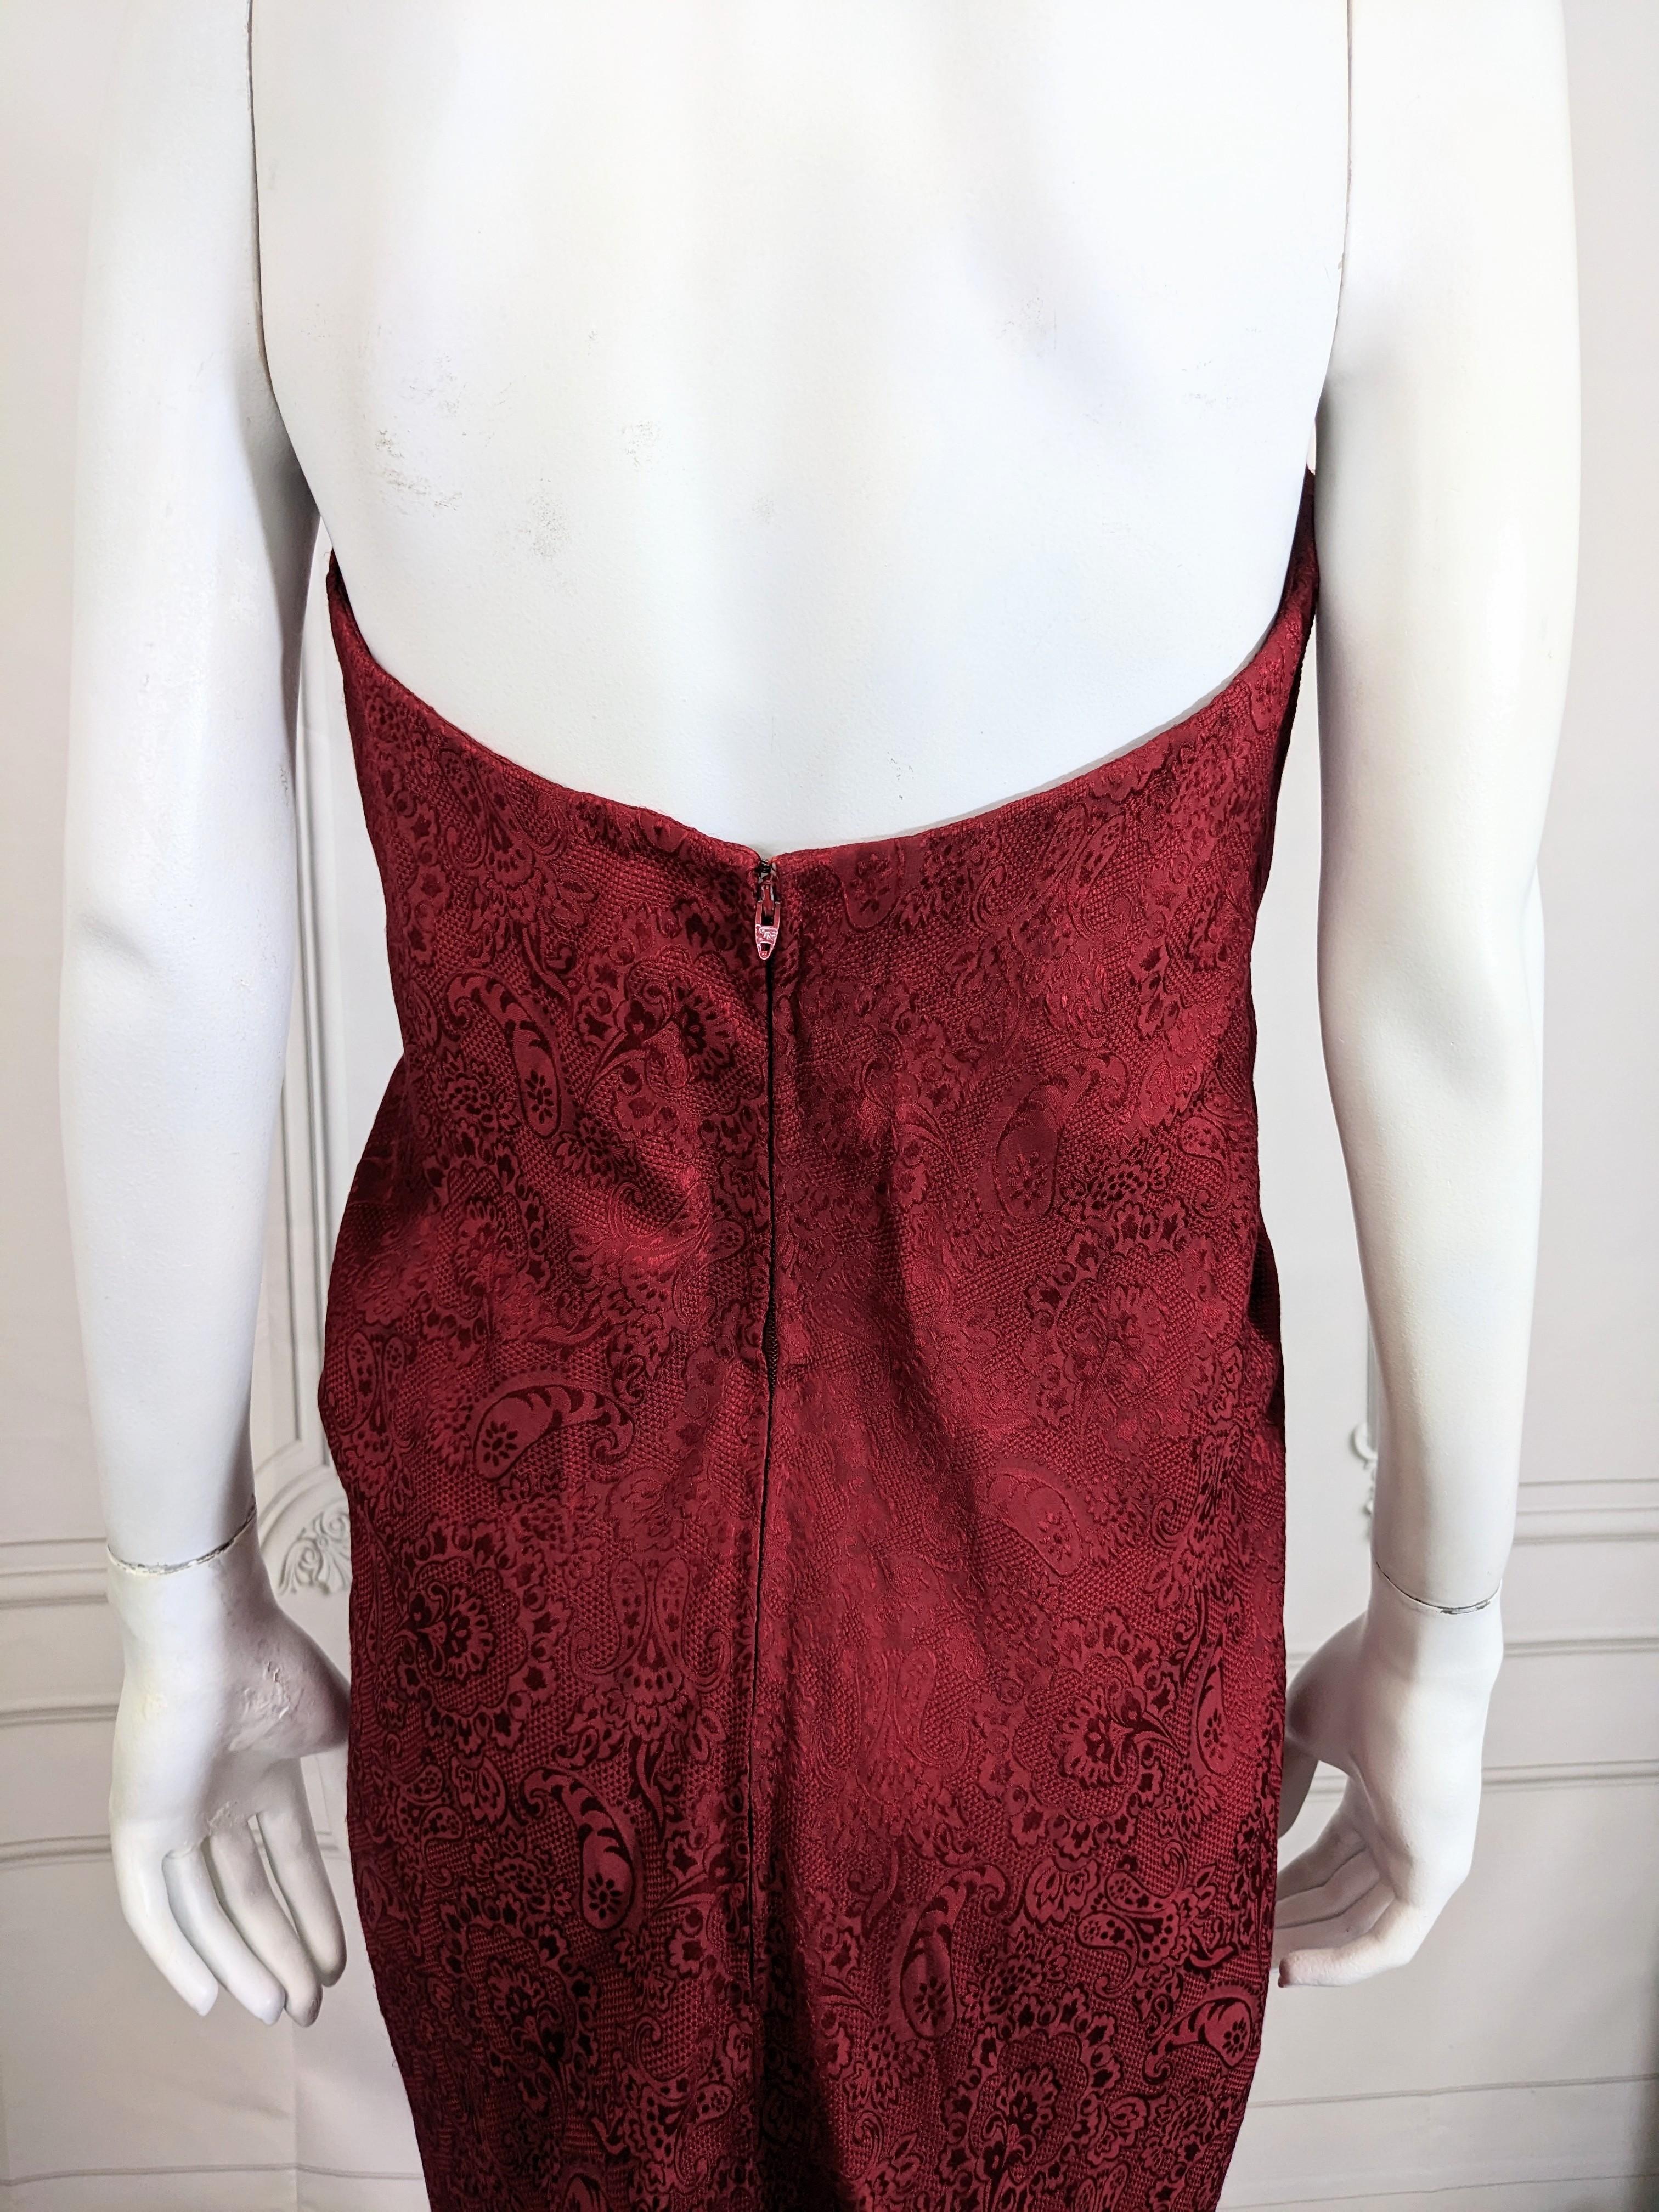 Women's Carolyne Roehm Strapless Burgundy Organza Gown For Sale